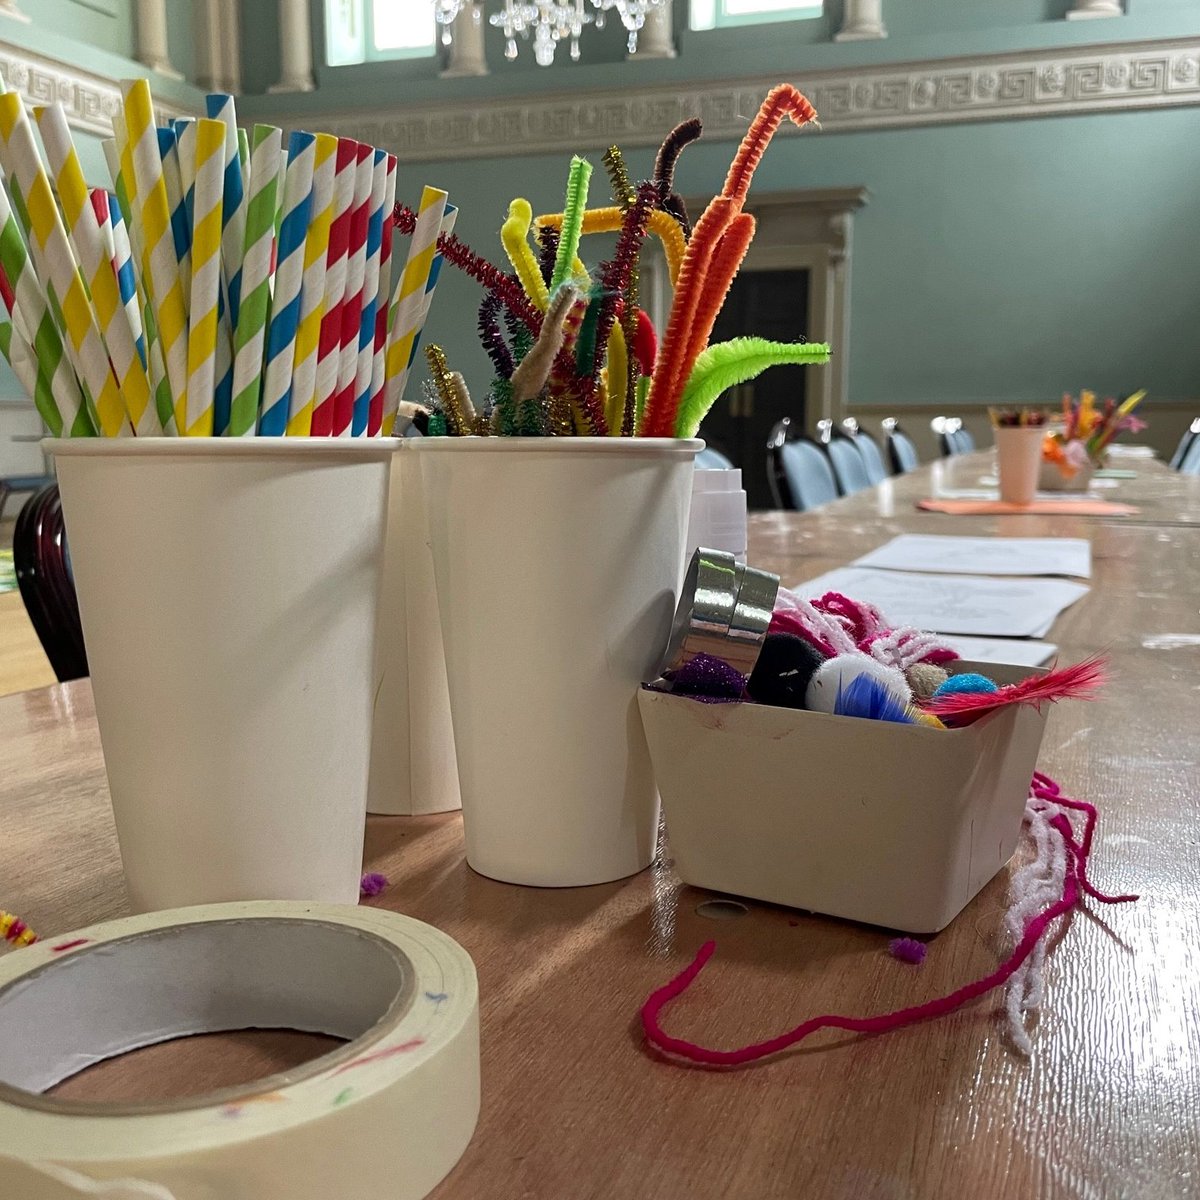 It's the last week of school holidays and our last week of #SummerOfPlay sponsored by @StarlingBank.

Available Tues, Wed and Thurs from 10am. The Ball Room is full of crafting, games, puzzles and a performance area. Book your tickets online bit.ly/3rwwqsu.

#ThingsToDo